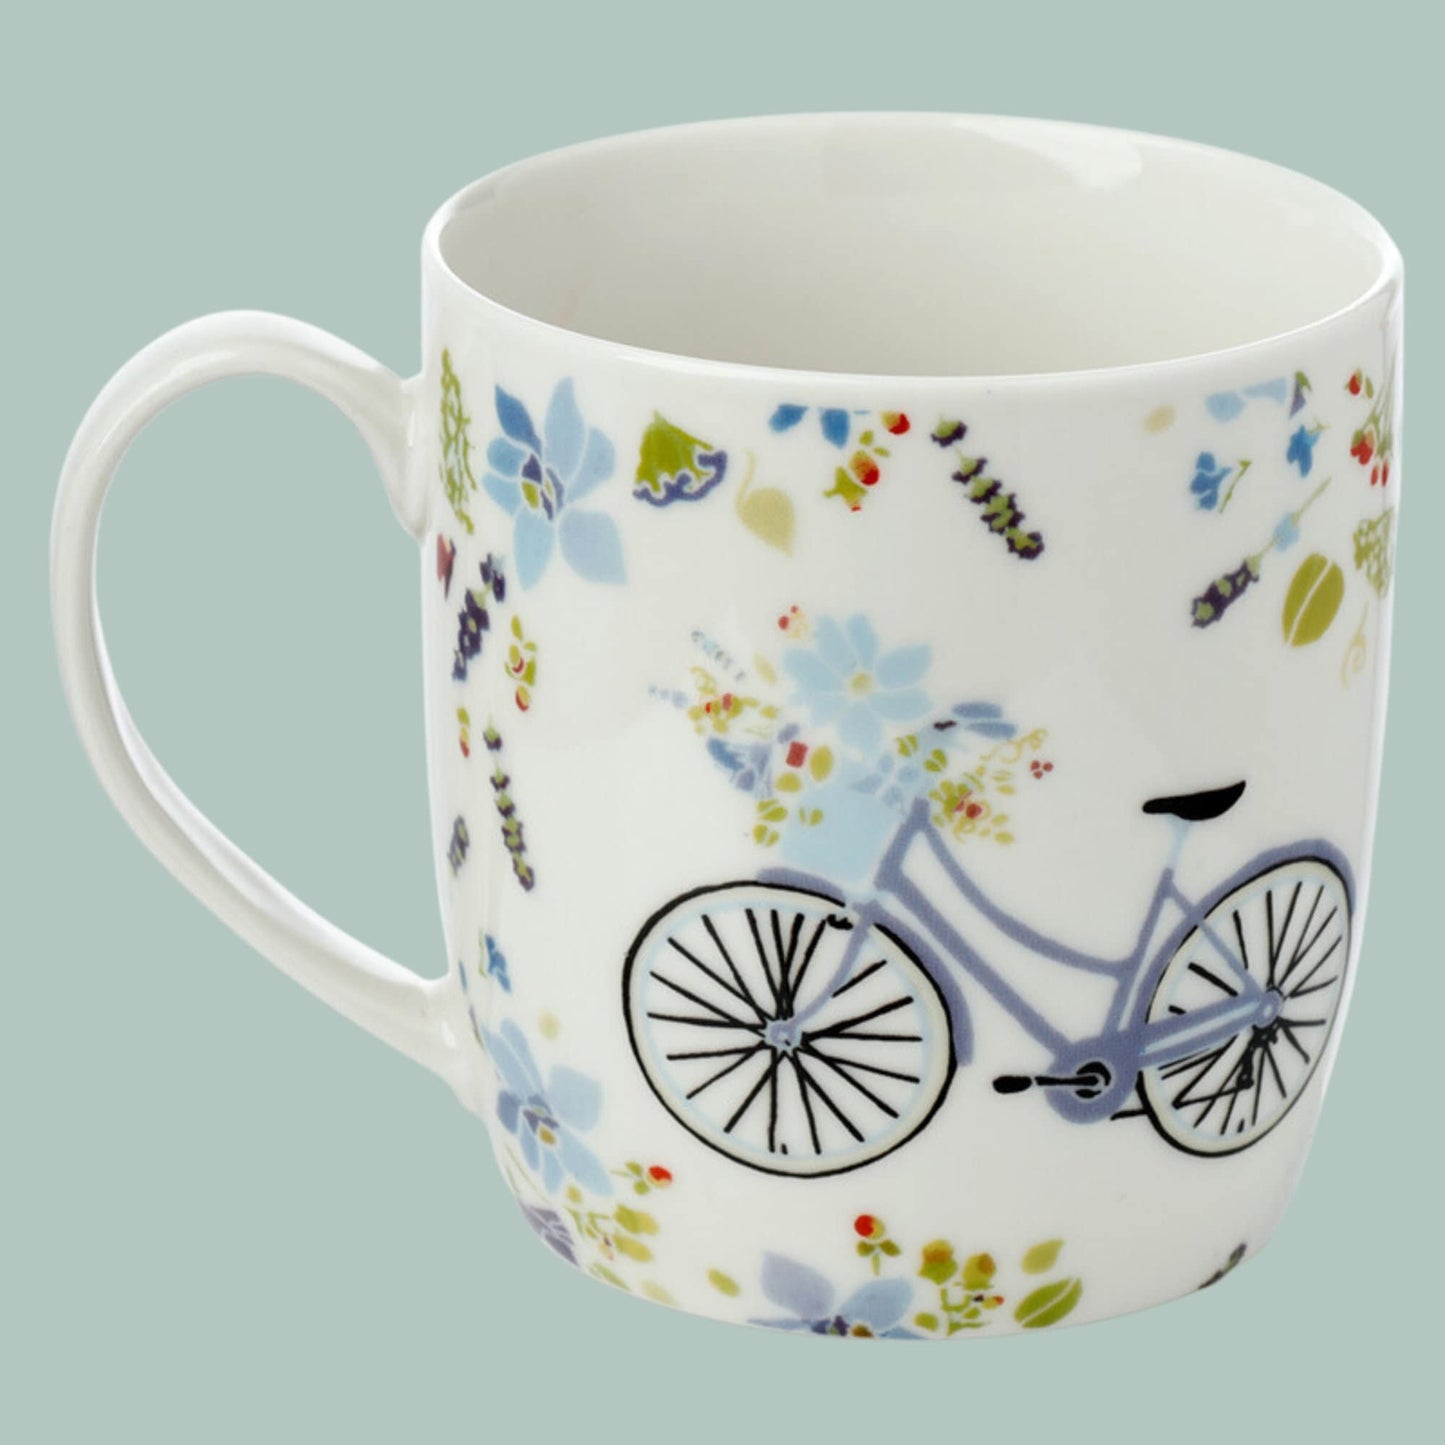 Floral Bicycle Porcelain Mugs Set Julie Dodsworth Beautiful Coffee Mugs Floral Bicycle Design Gift For Bicycle Lover Horticulturist Present